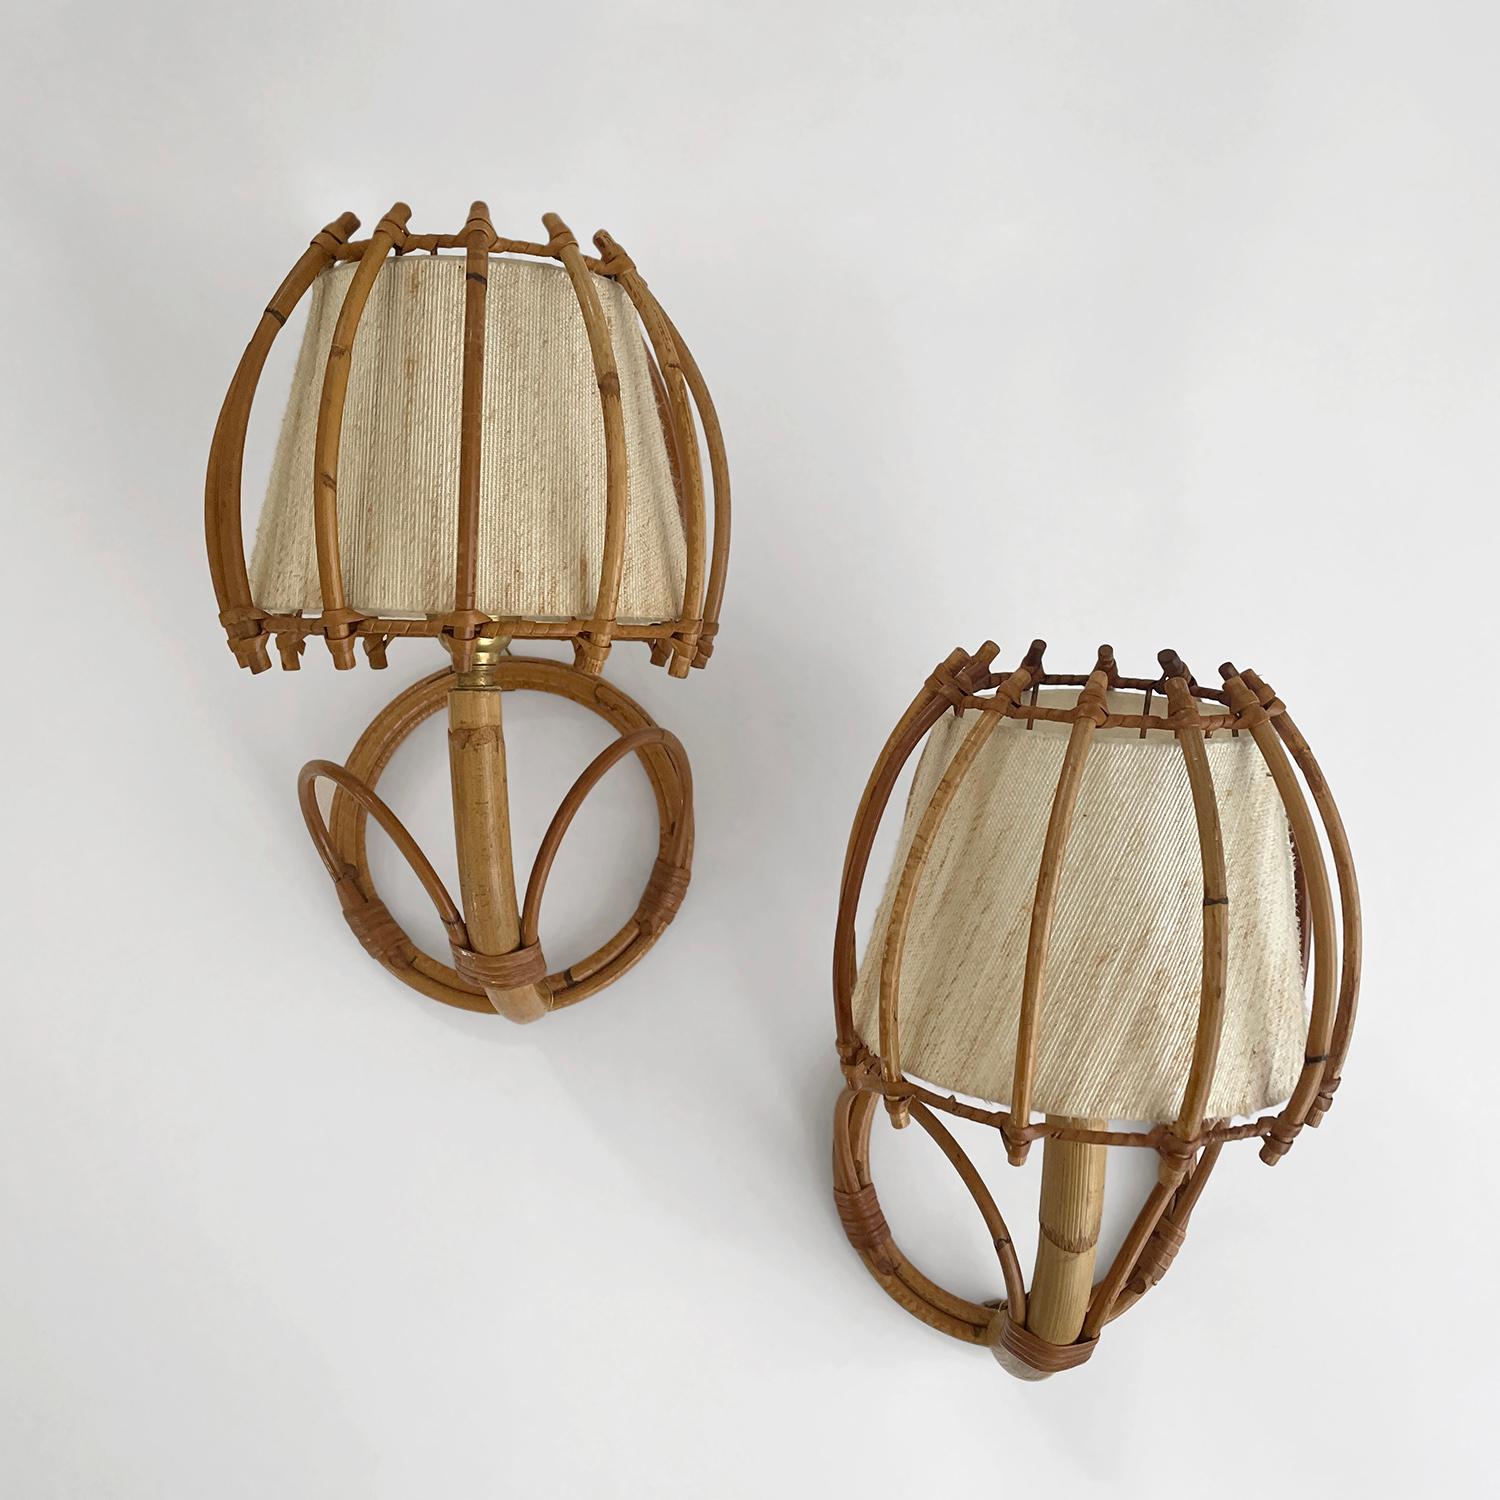 Pair of Louis Sognot rattan lantern sconces
France, circa 1960s
Each lamp is unique in its organic composition and feel 
Sculpted circular rattan wall mounted backpiece is accented with looped details and has a single mounting loop
Ascending arm